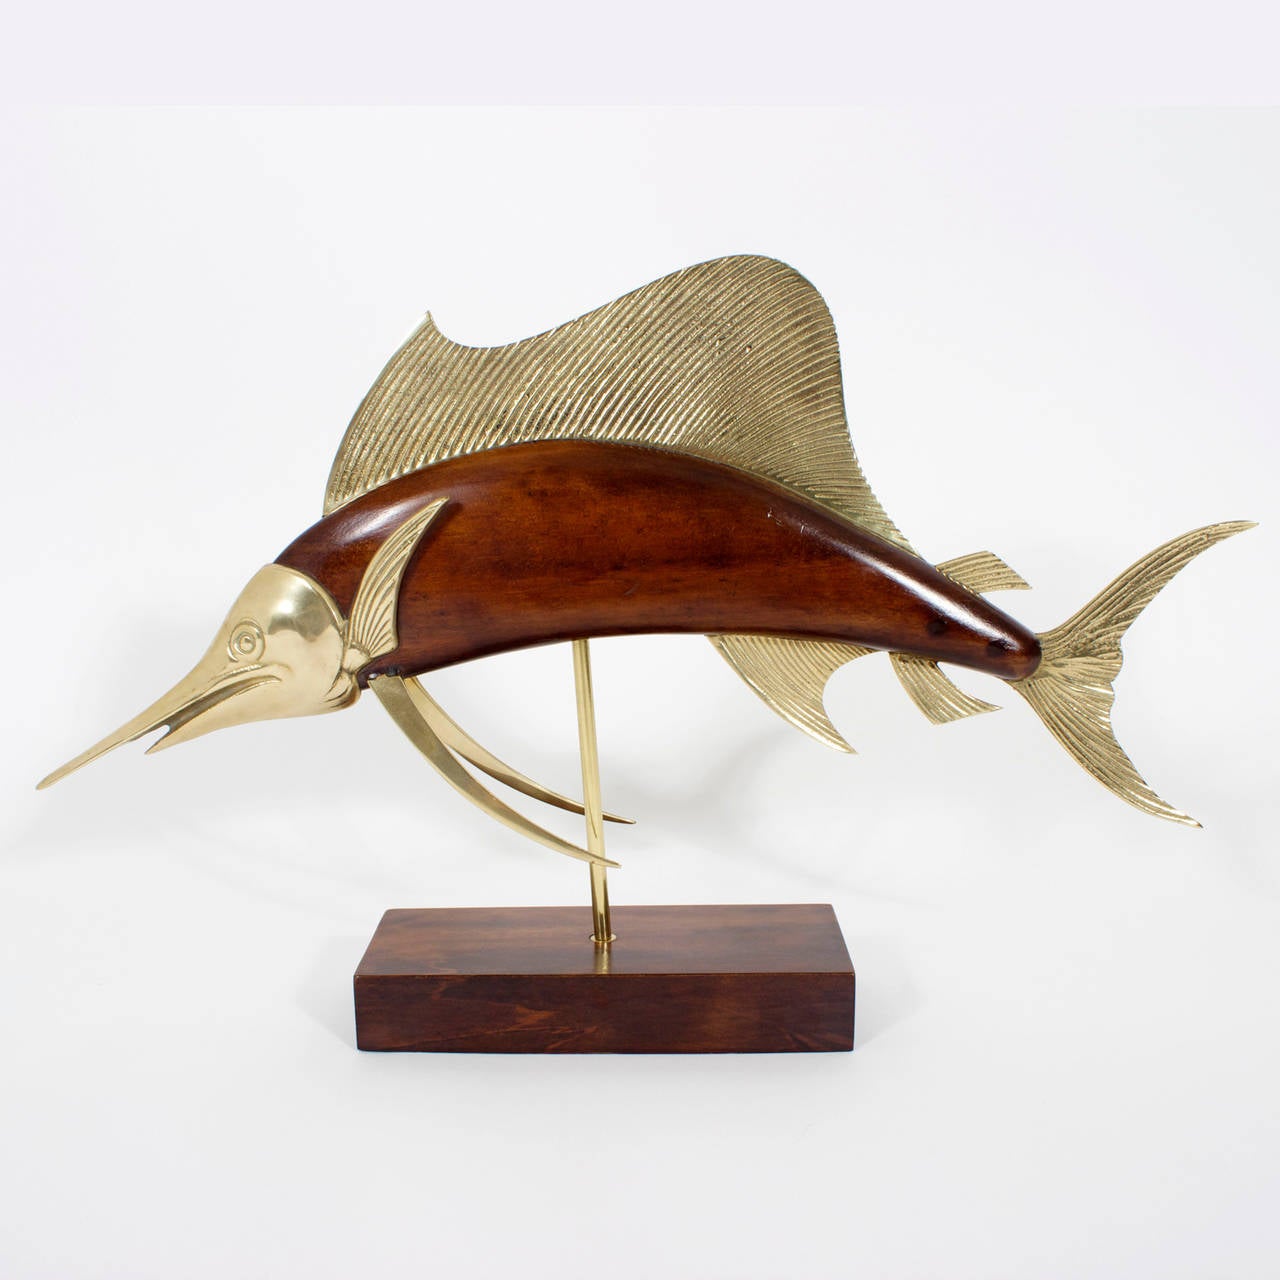 Whimsical sailfish sculpture executed in mahogany with brass accents mounted on a brass rod over a hardwood base. Labeled Frederick Cooper.

